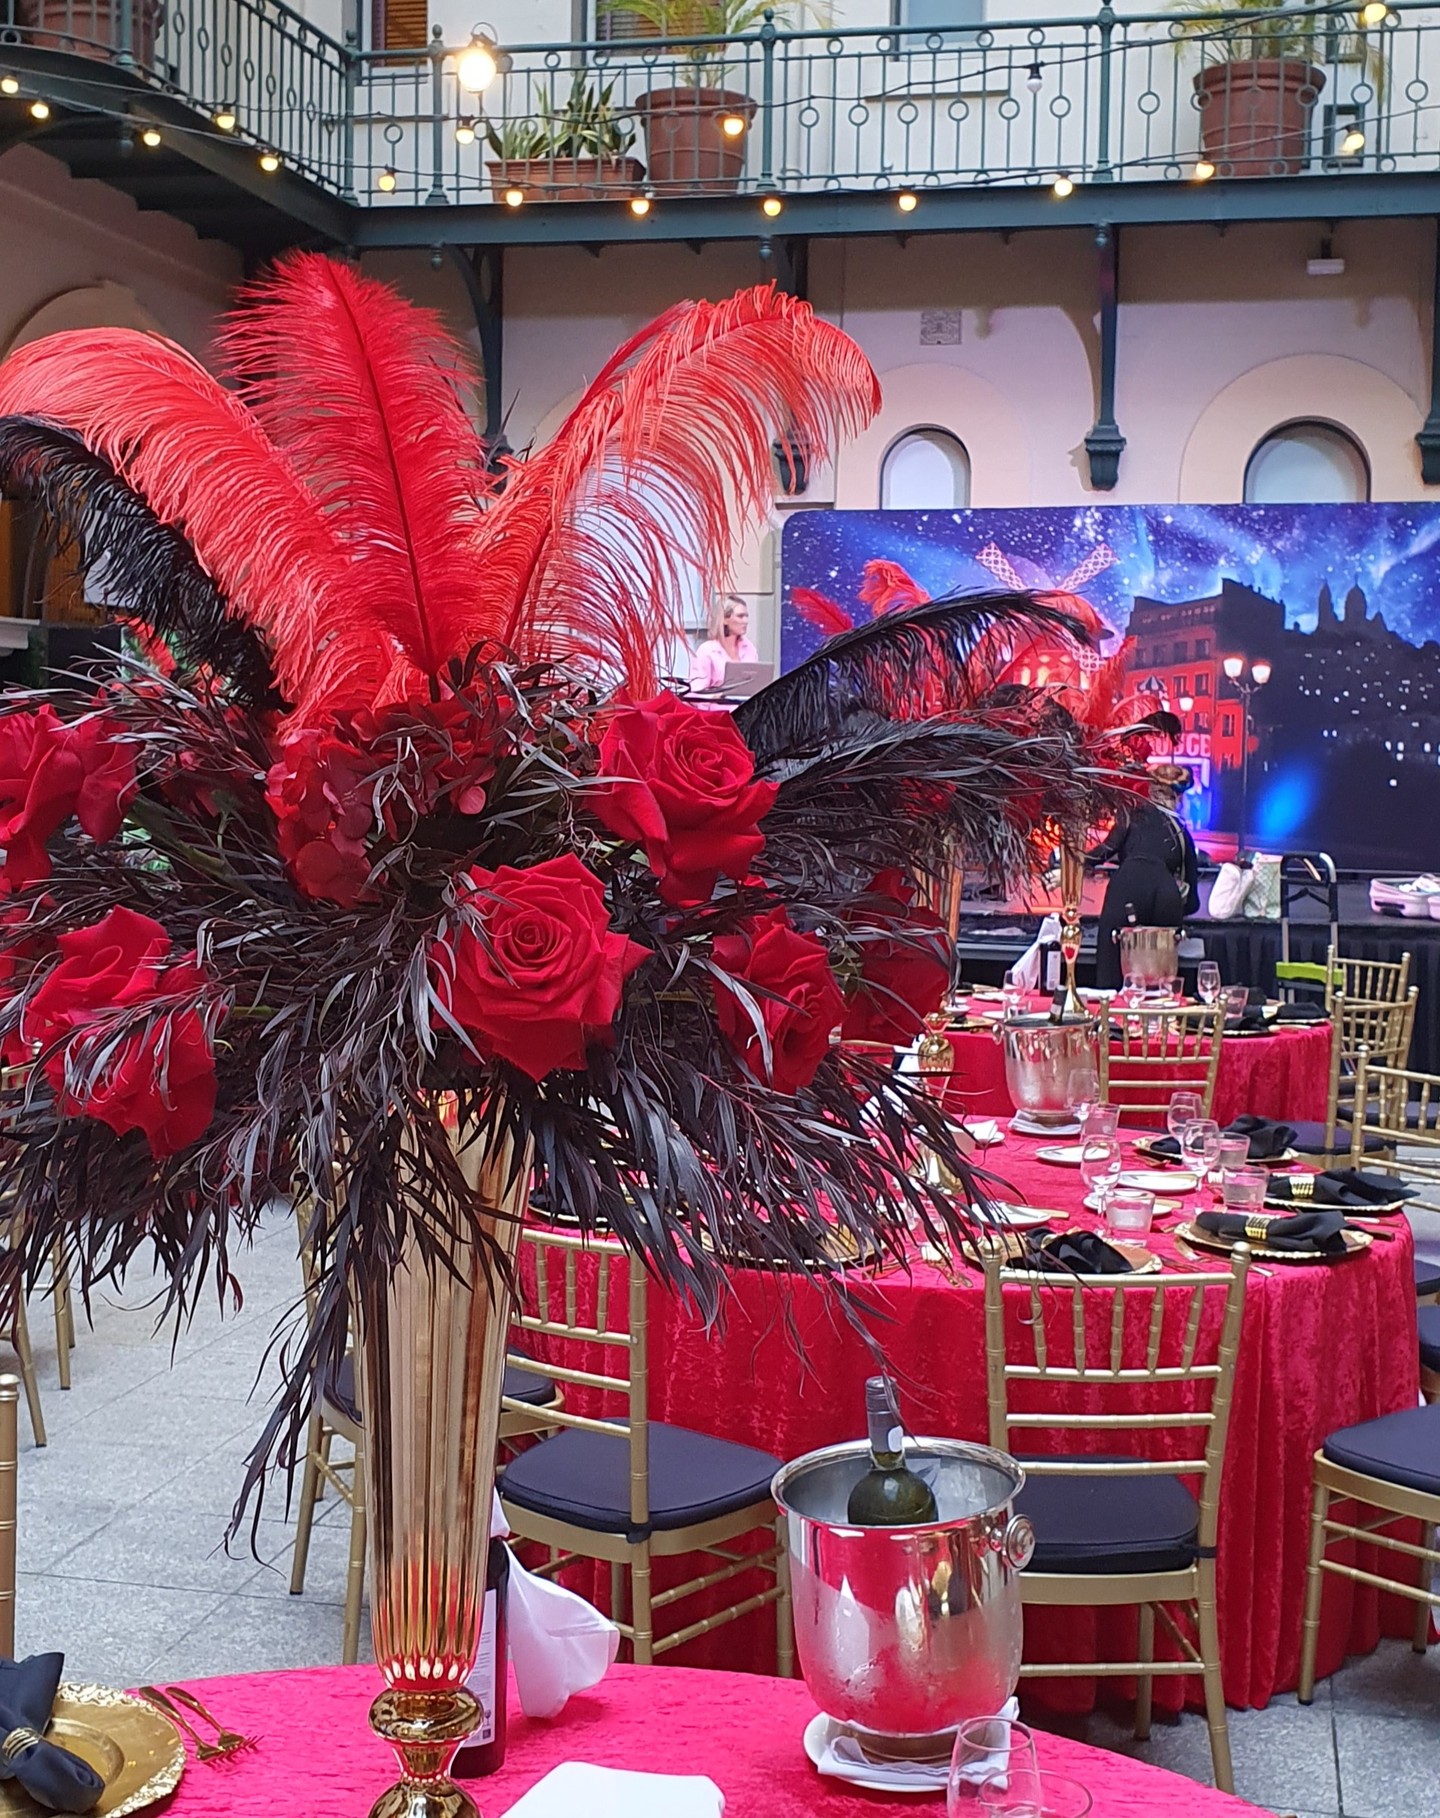 Sexy reds and moody blacks for this Moulin Rouge themed VIP dinner last night.

#moulinrouge #redandblack #petalsandprops #eventdesign #tablescapes #tablescapestyle #instaflorist #floristsofinstagram